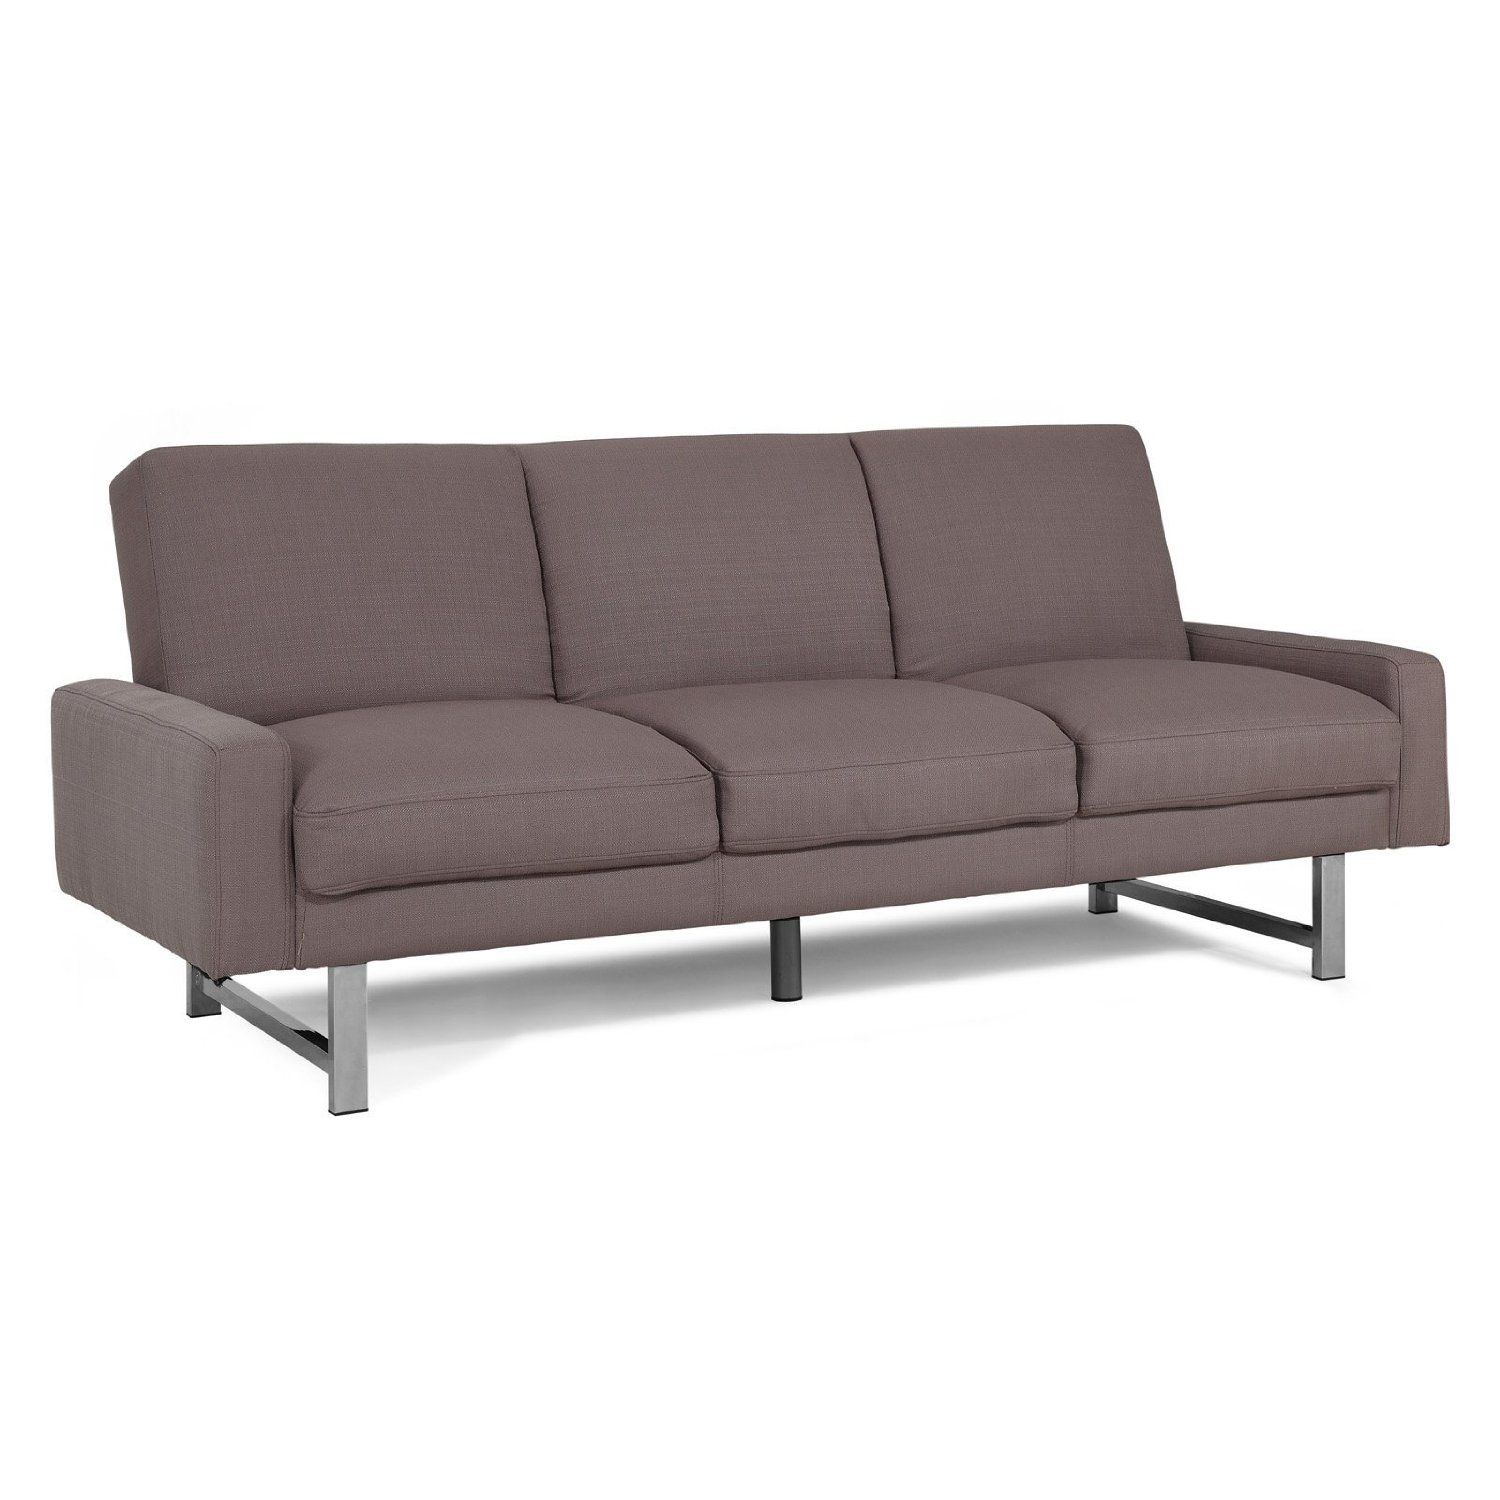 Convertible Sofa: Convertible Sectional Sofa In 8 Seat Convertible Sofas (Gallery 18 of 20)